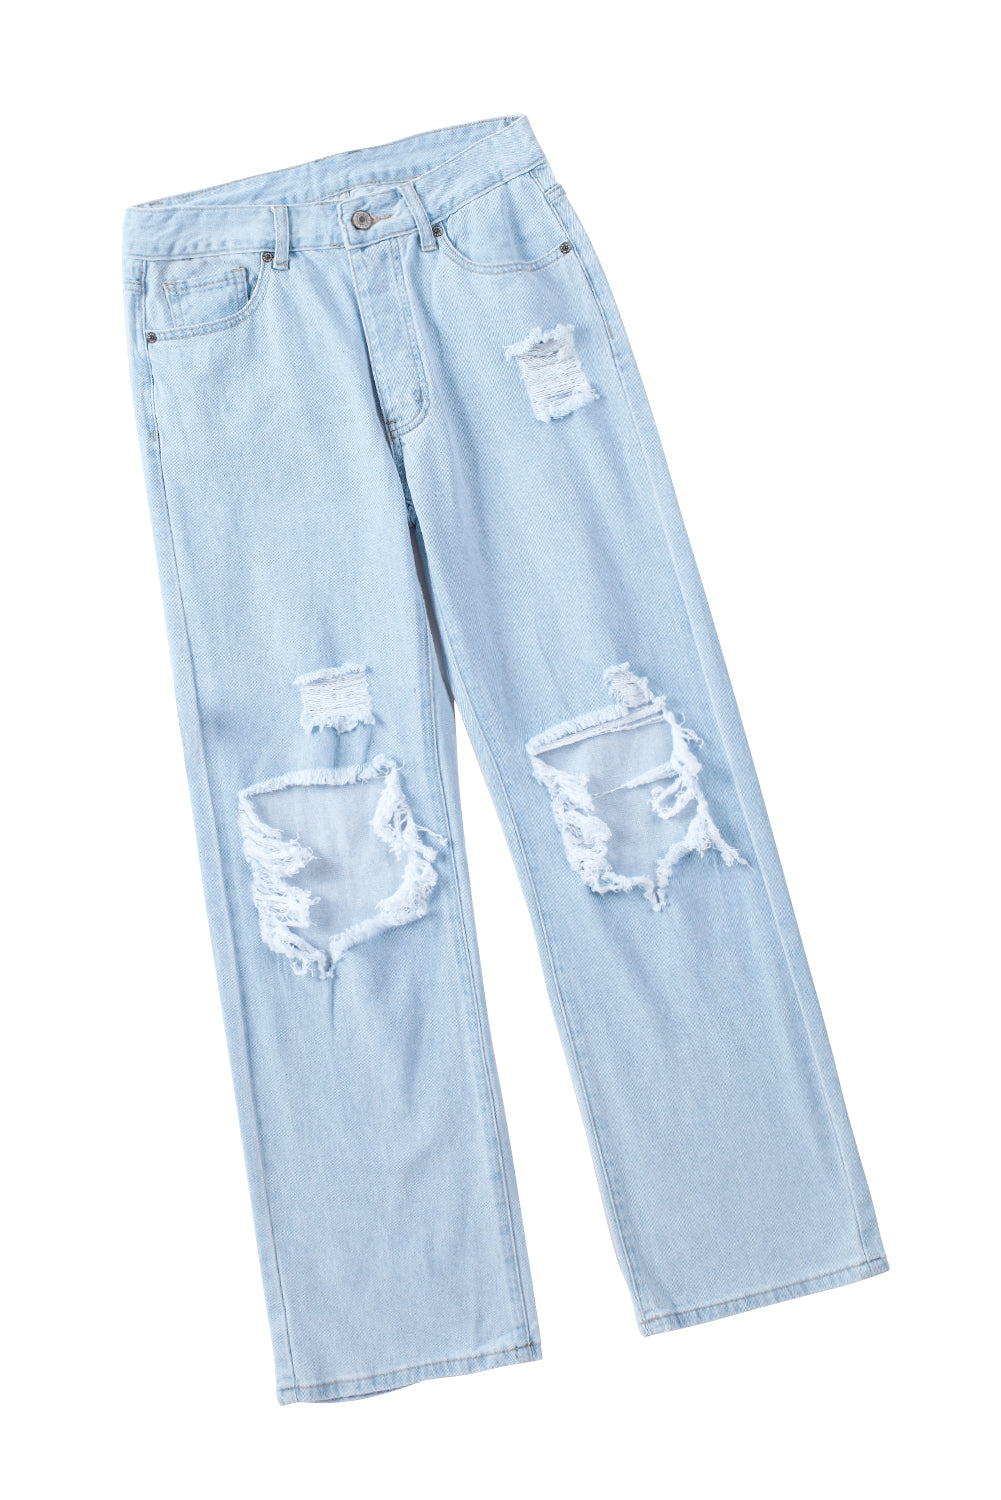 Make Your Day High Waist Distressed Jeans